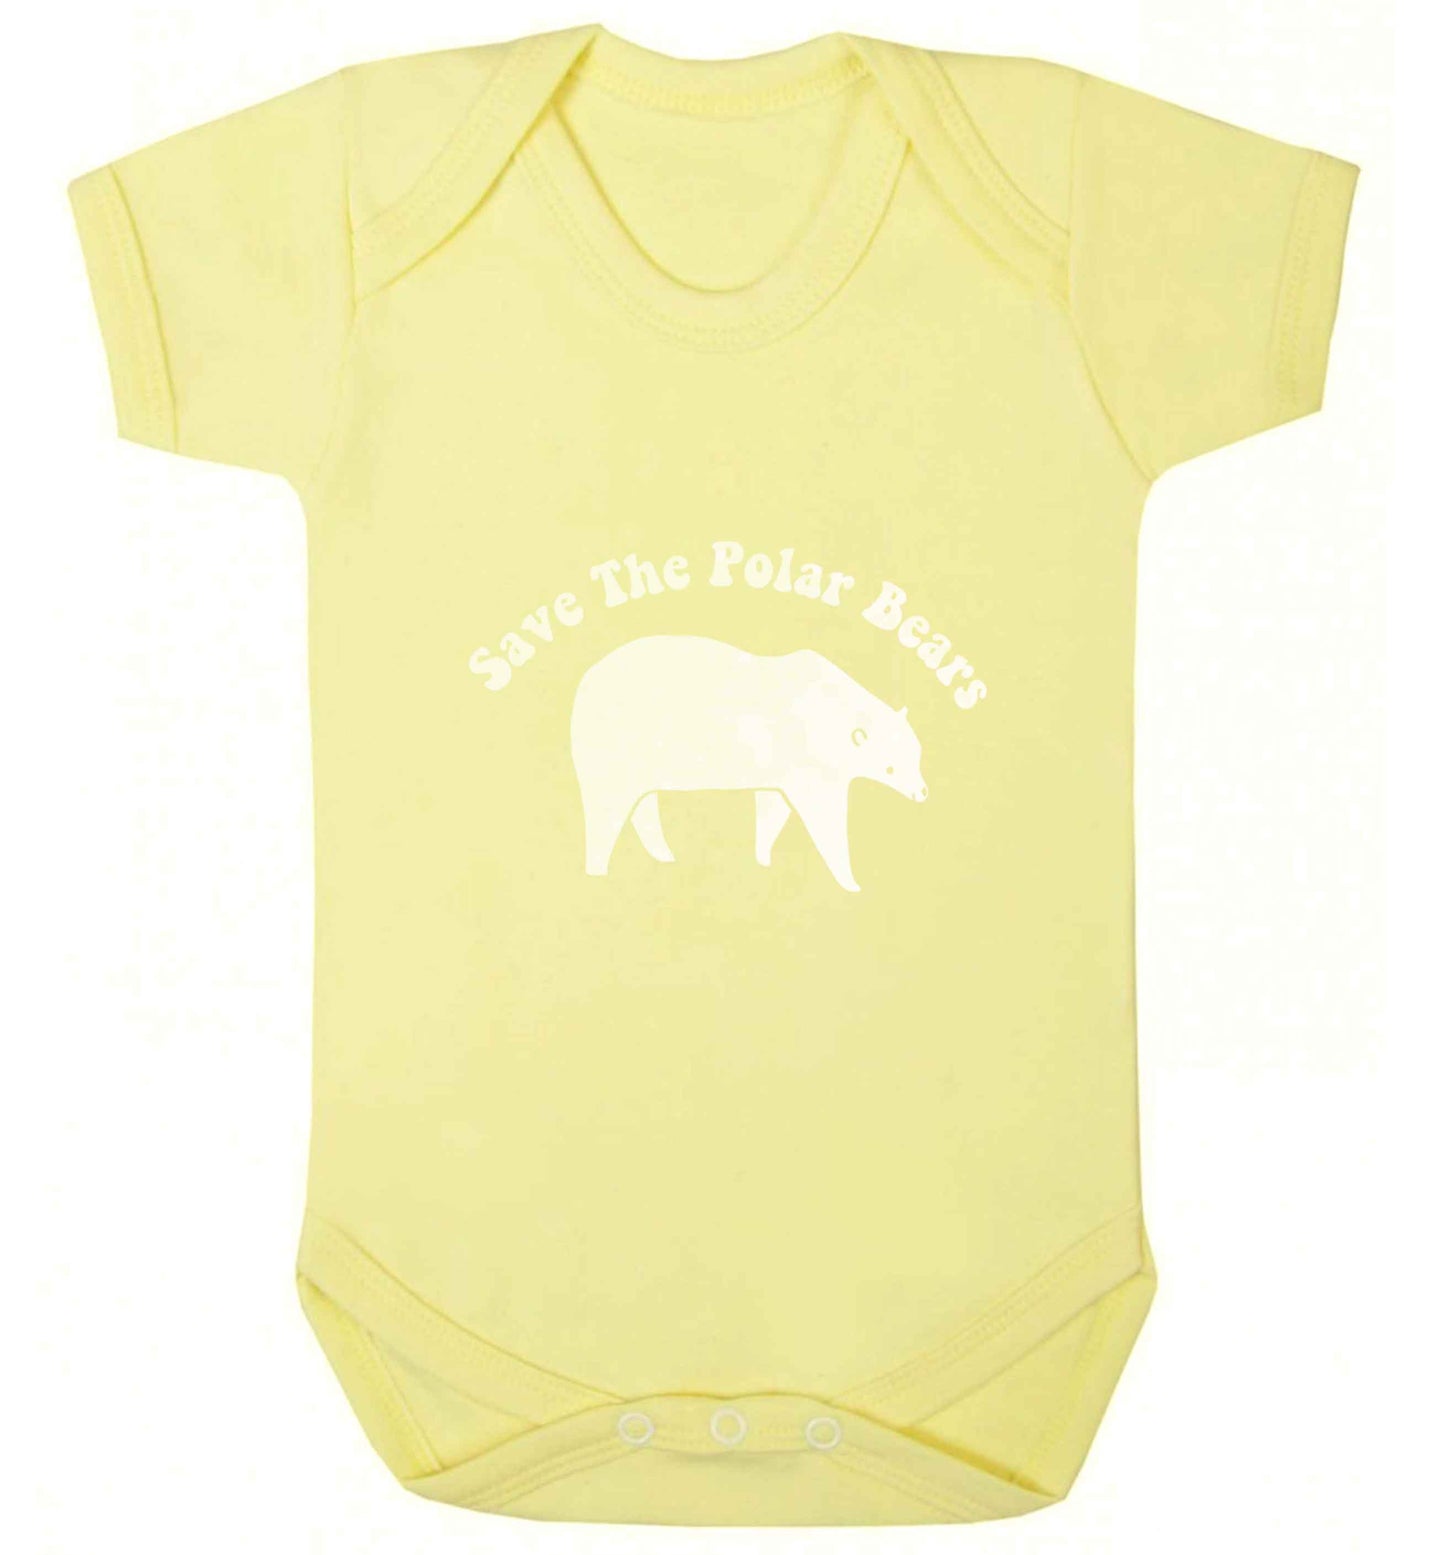 Save The Polar Bears baby vest pale yellow 18-24 months